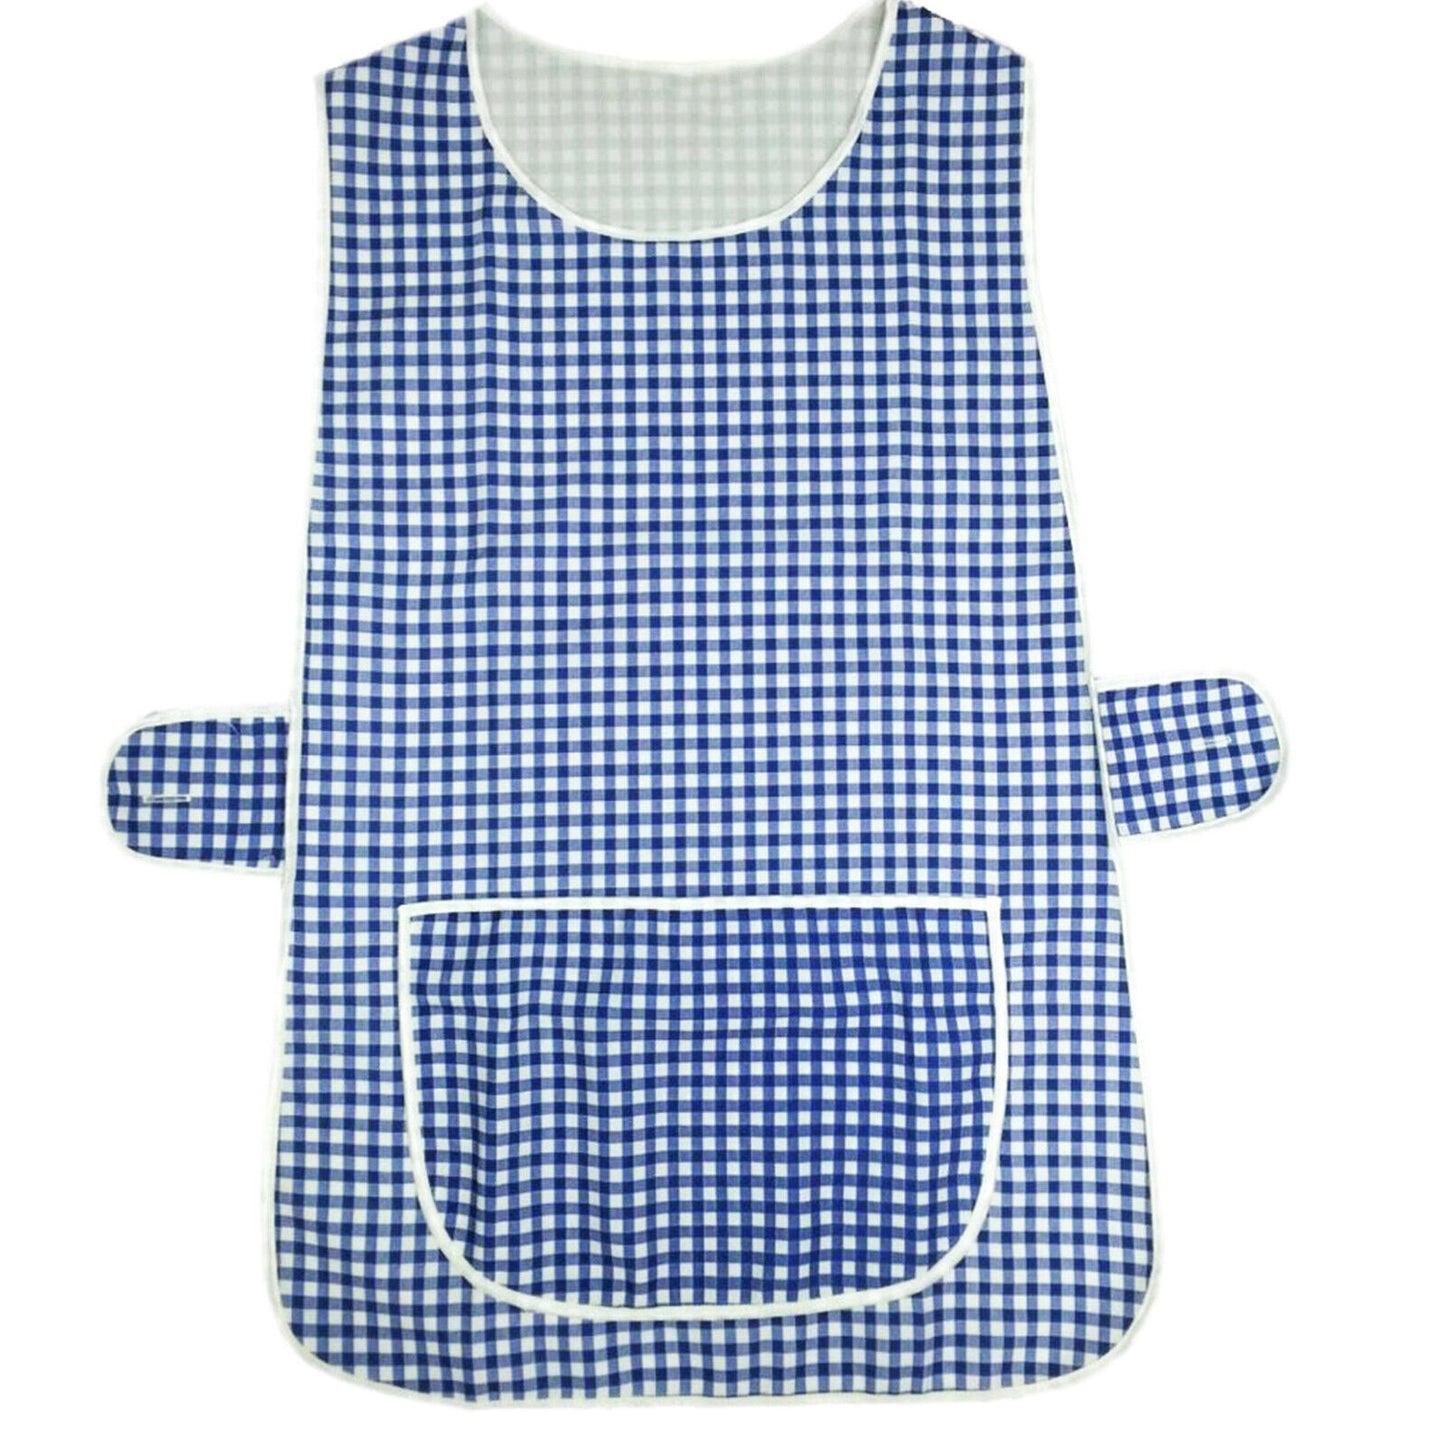 WHITE PIPING TABARD WOMENS TABBARD LADIES APRON WITH POCKET KITCHEN CLEANING CHEF WORK WEAR